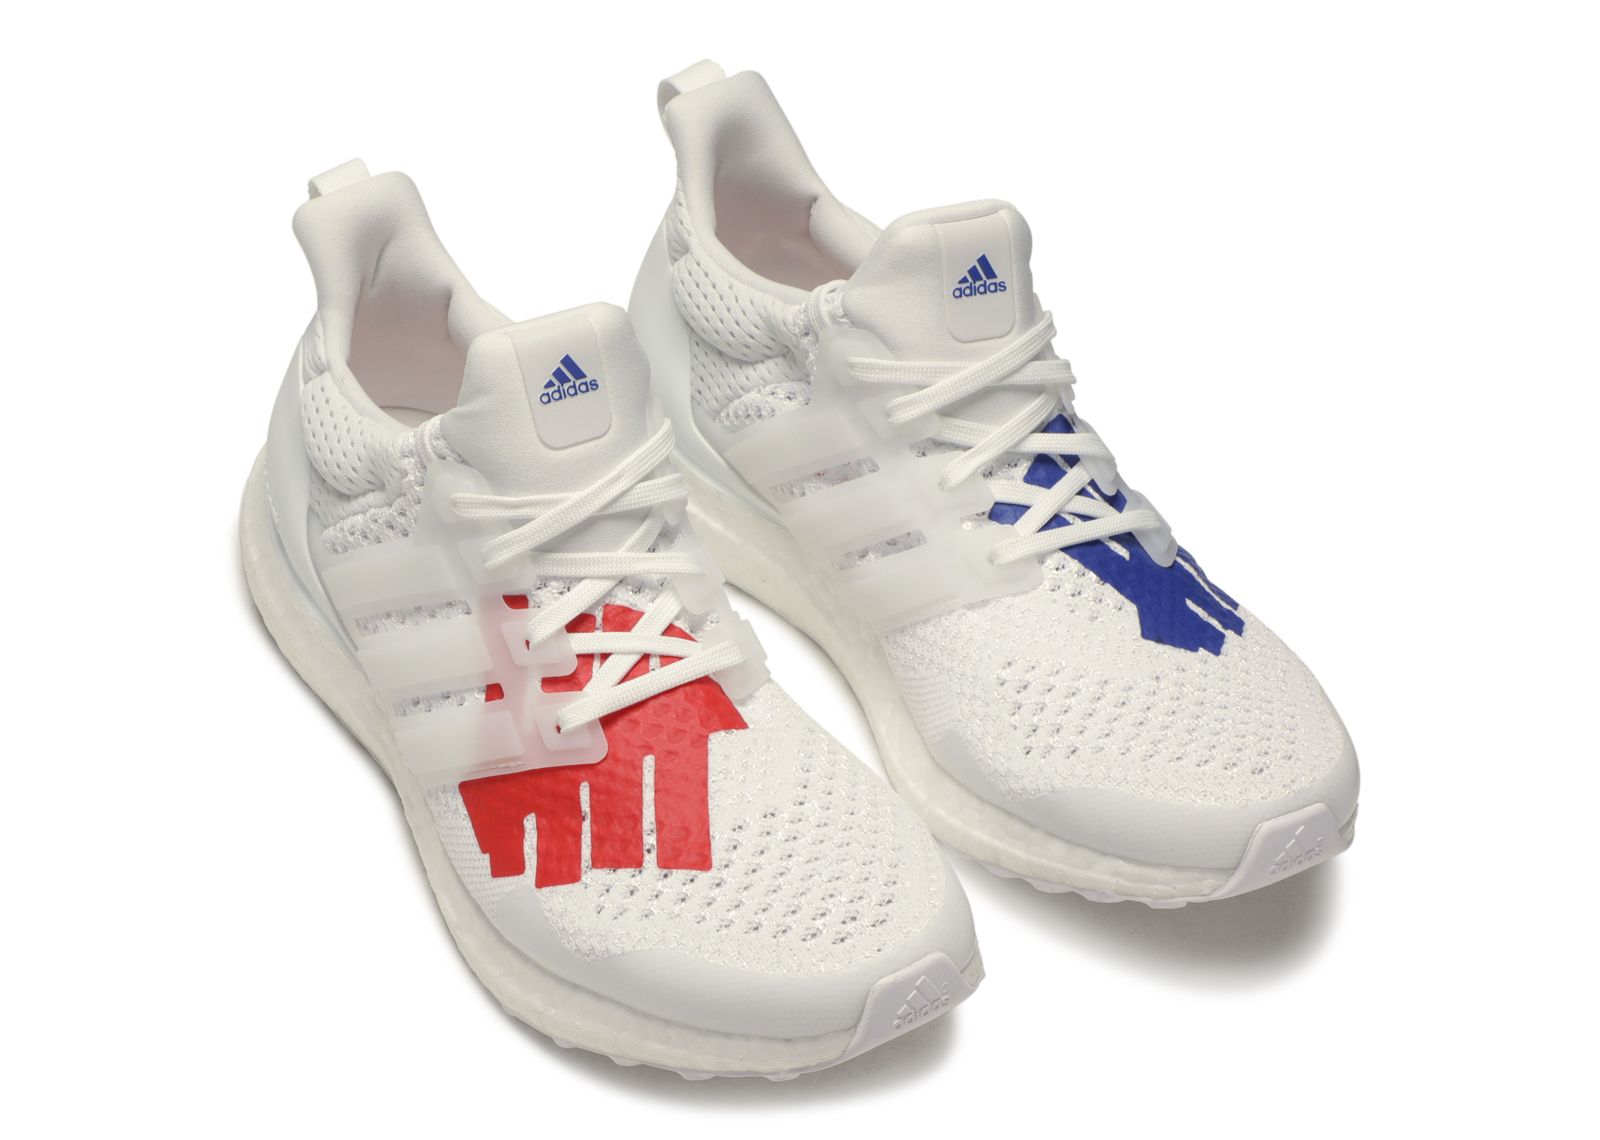 adidas stars and stripes ultra boost